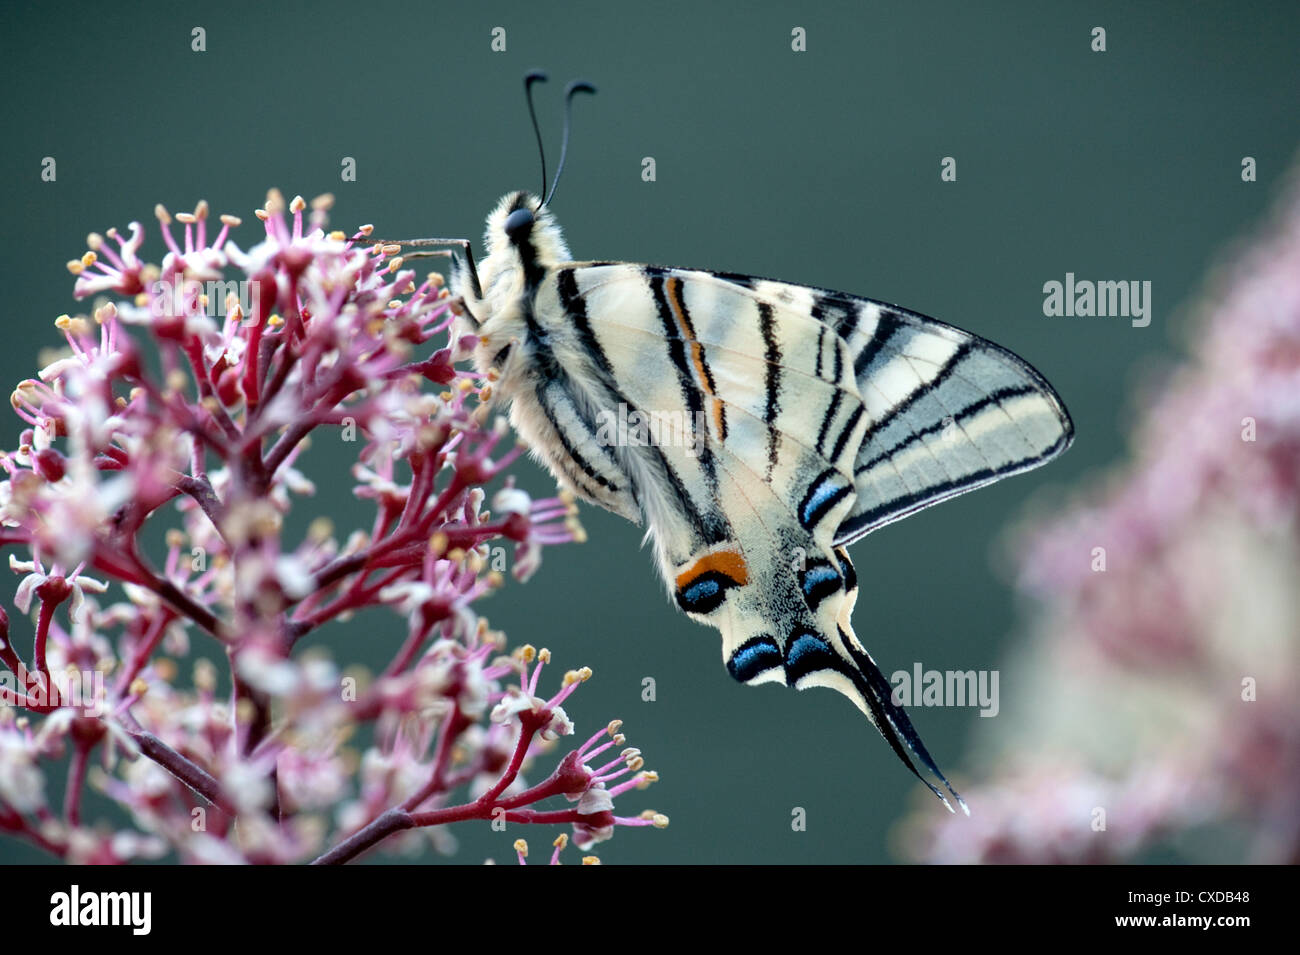 Les rares Swallowtail Butterfly, Iphiclides podalirius, Banque D'Images